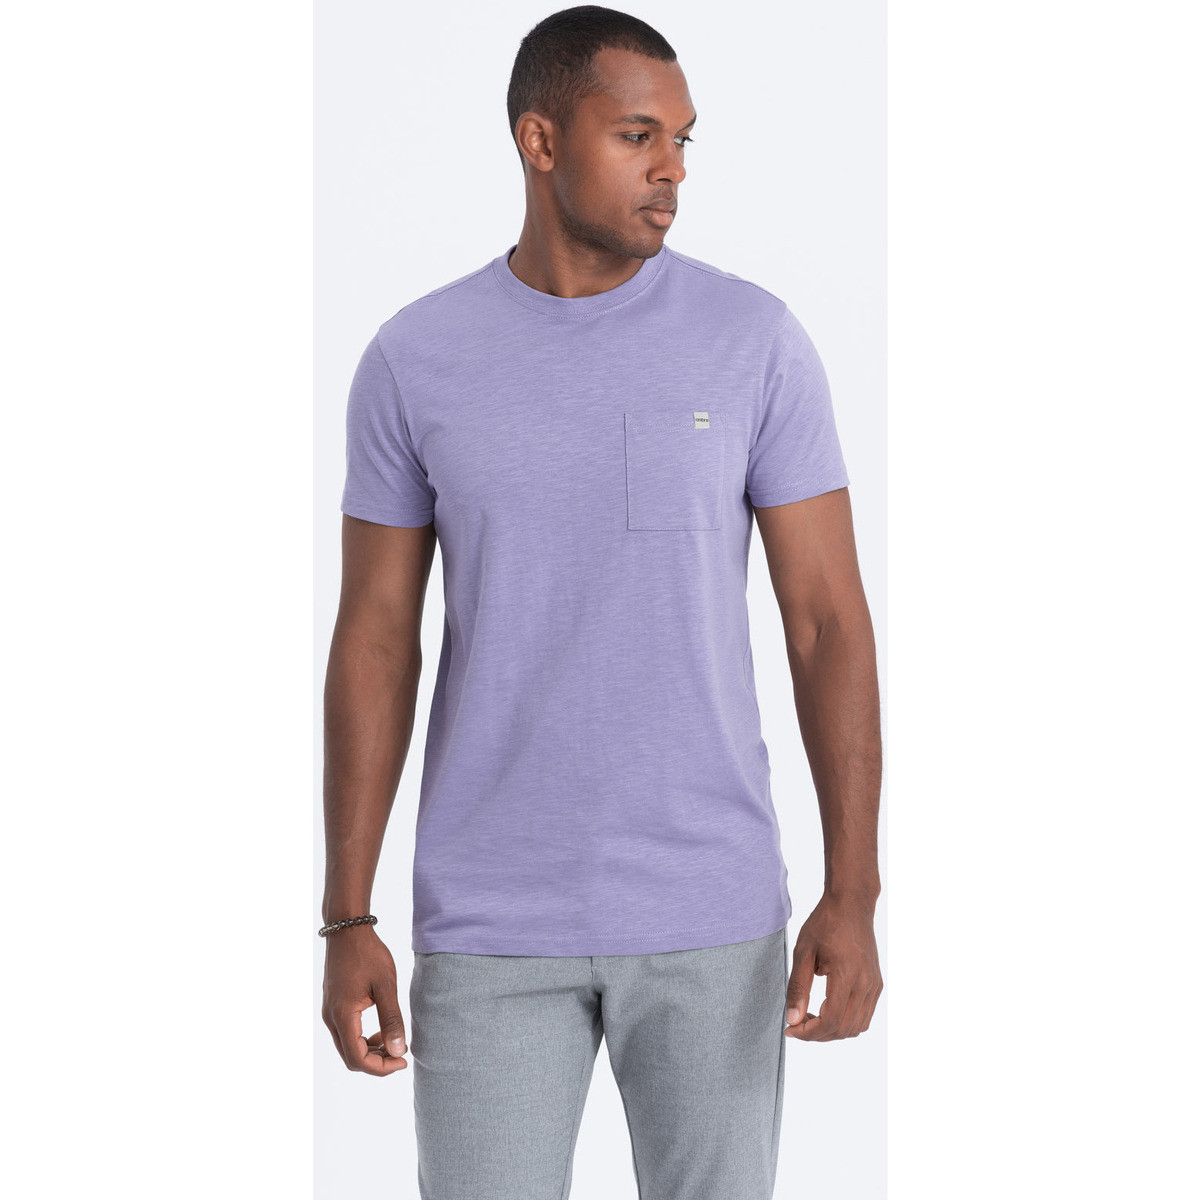 Ombre  Men apos;s knitted T-shirt with patch pocket  ruznobarevne